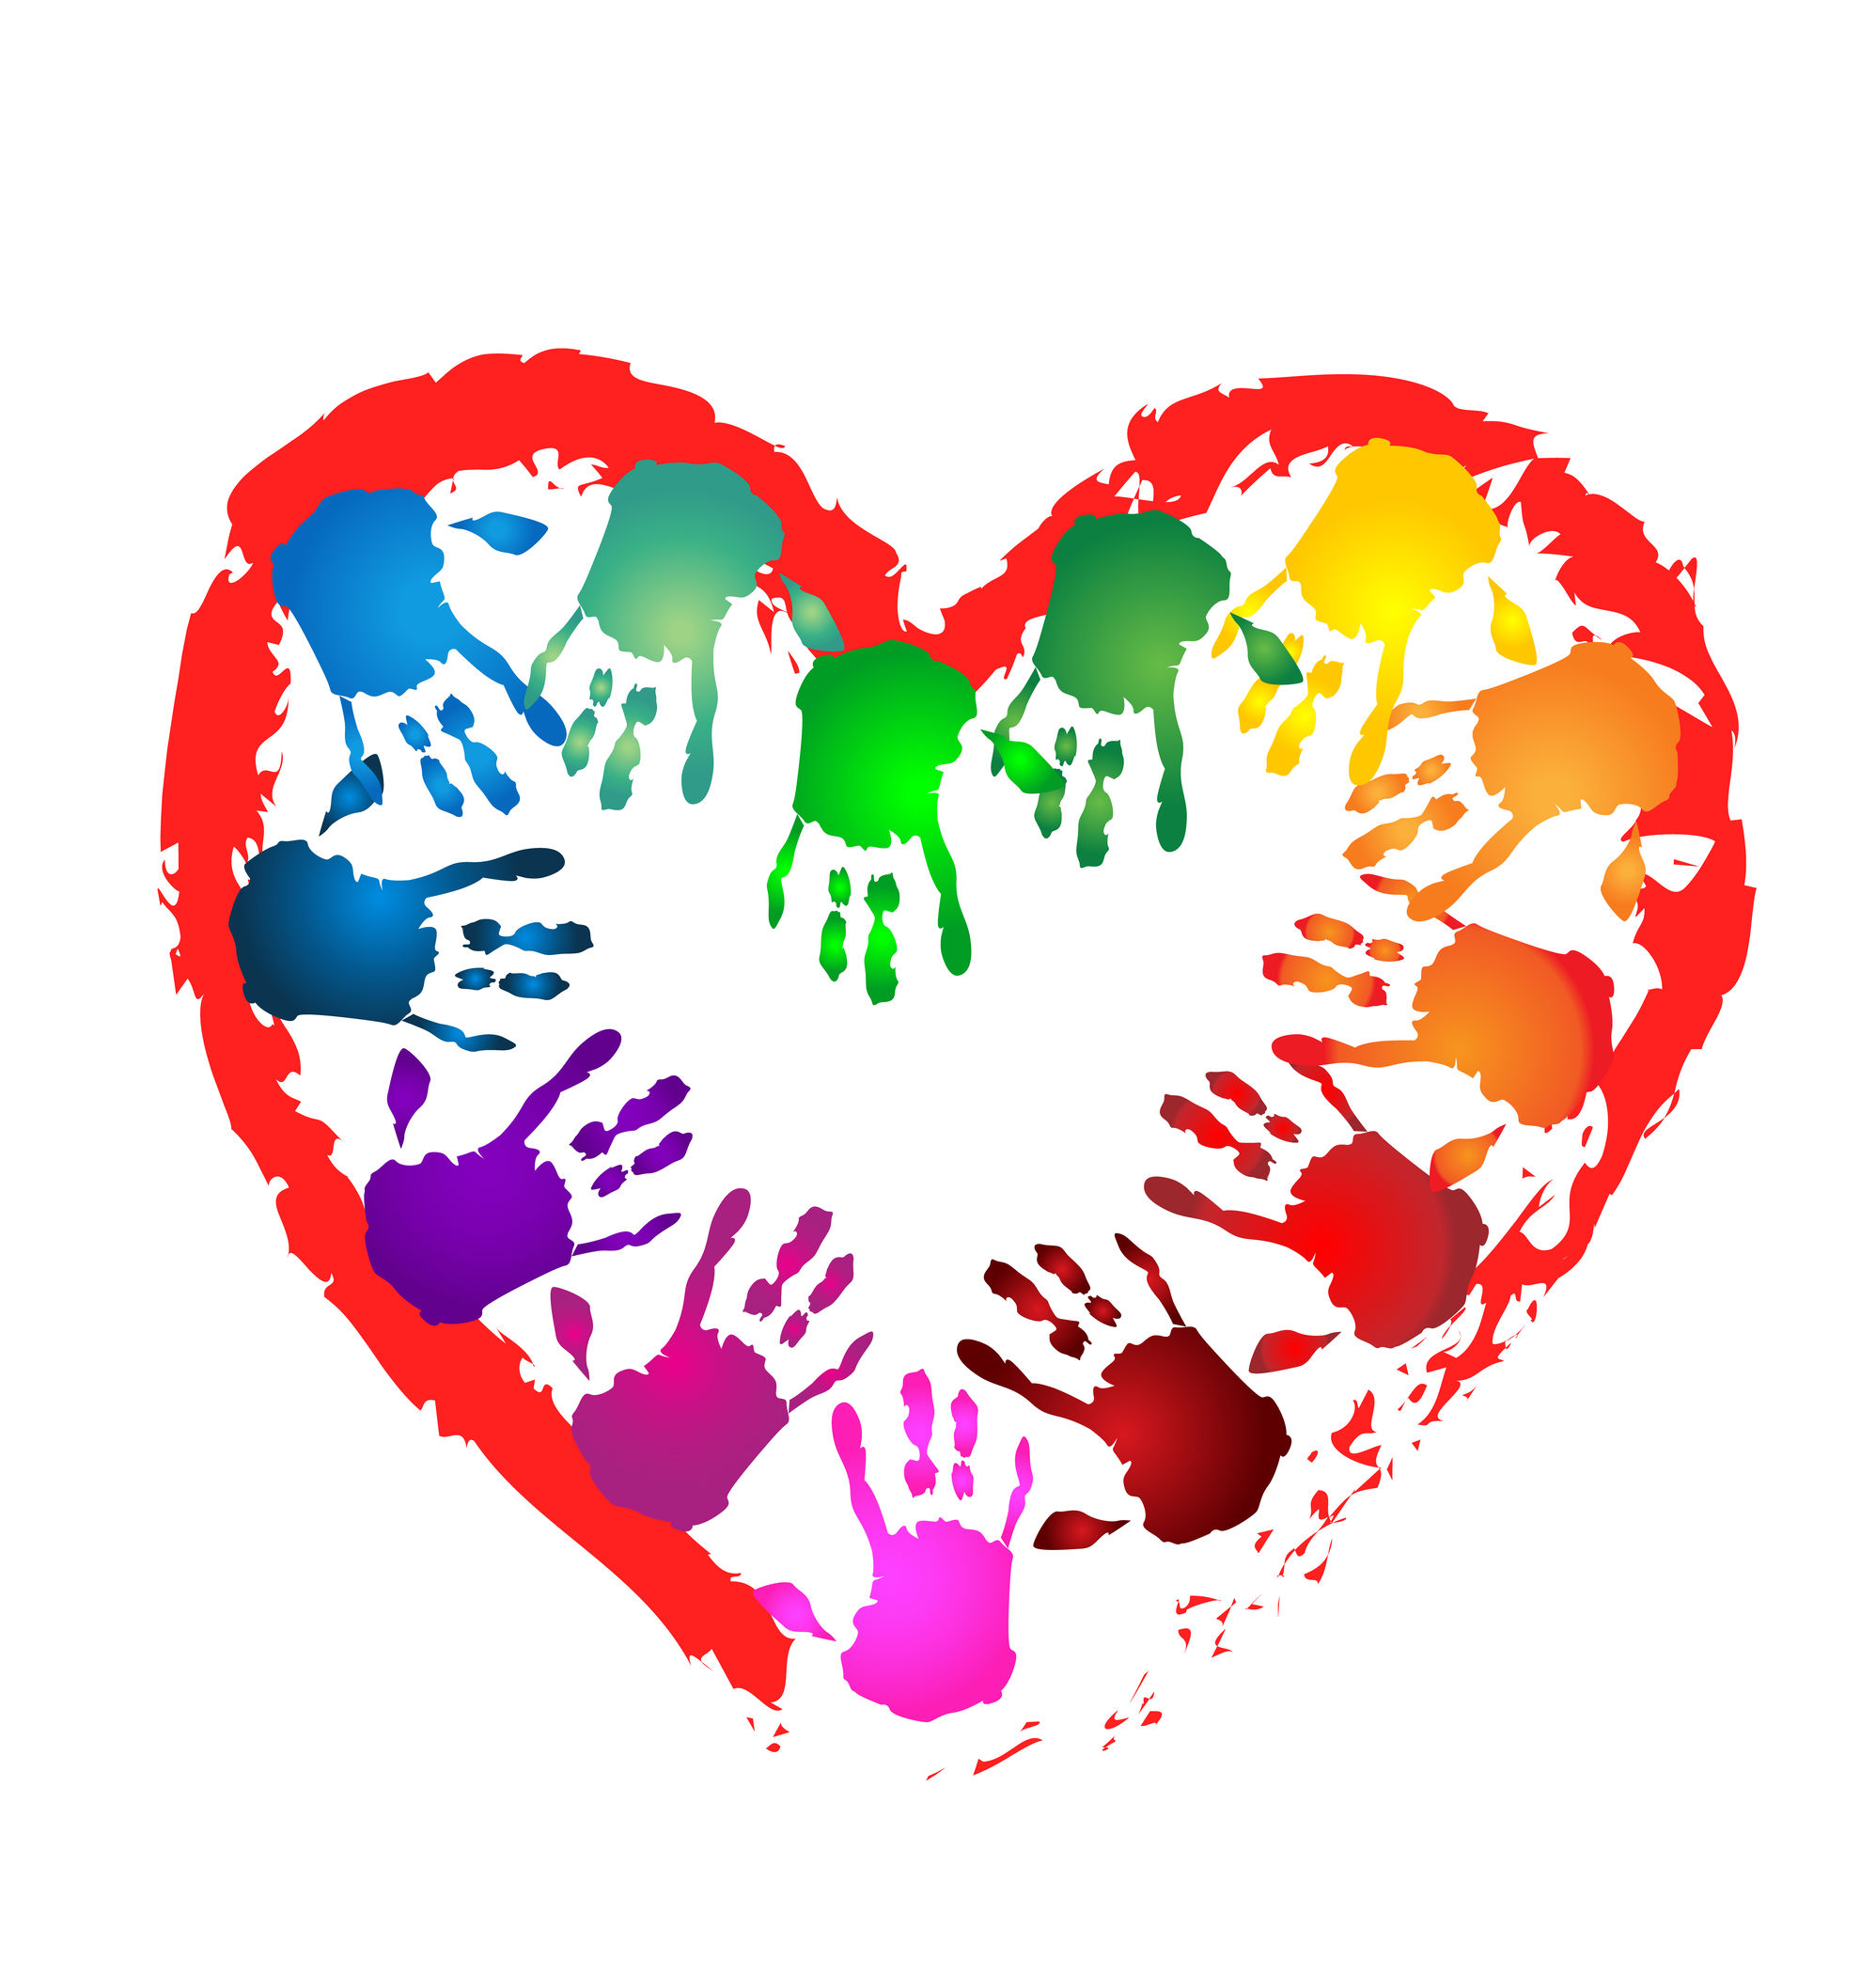 Illustrated image of colourful hands forming a heart